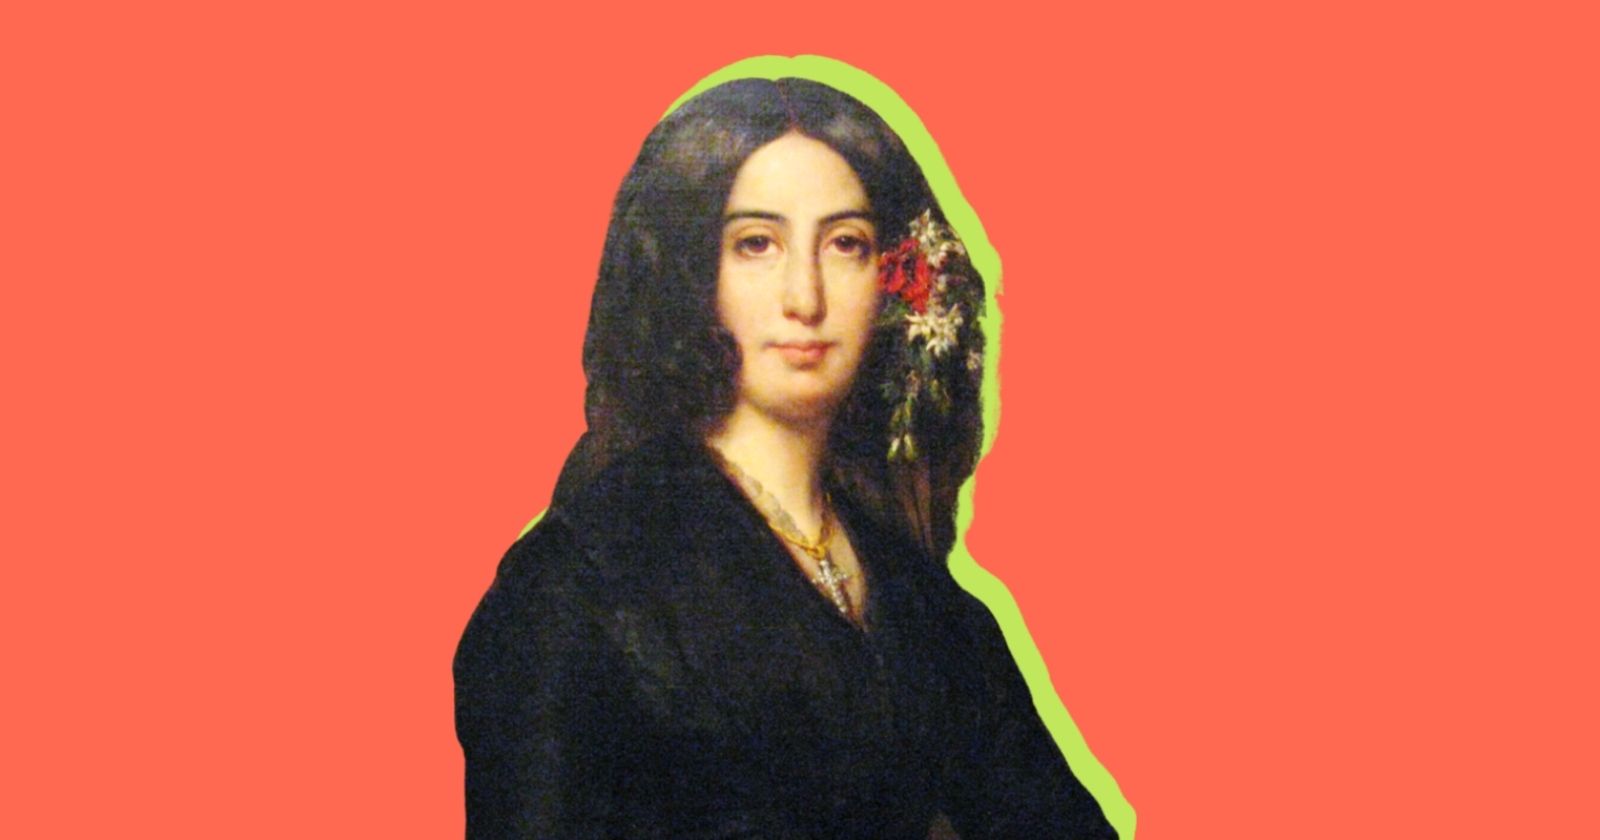 George Sand, defender of nature: "at once a woman of passion, reason and intuition"